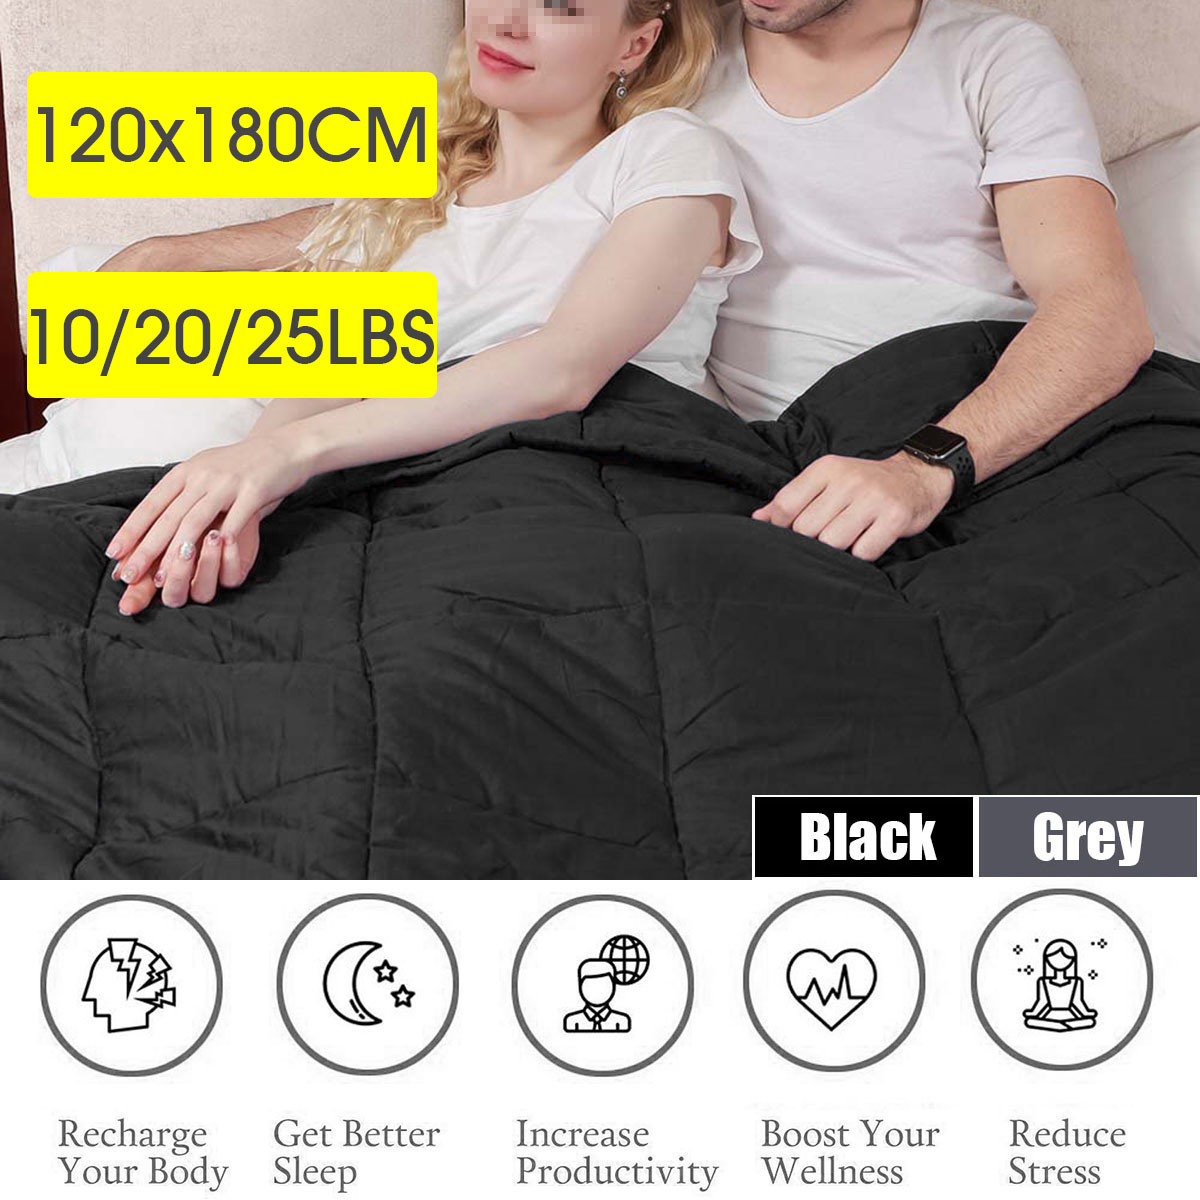 120x180CM-Black-Grey-Weighted-Blanket-Cotton-79115kg-Heavy-Sensory-Relax-Blankets-1349466-1